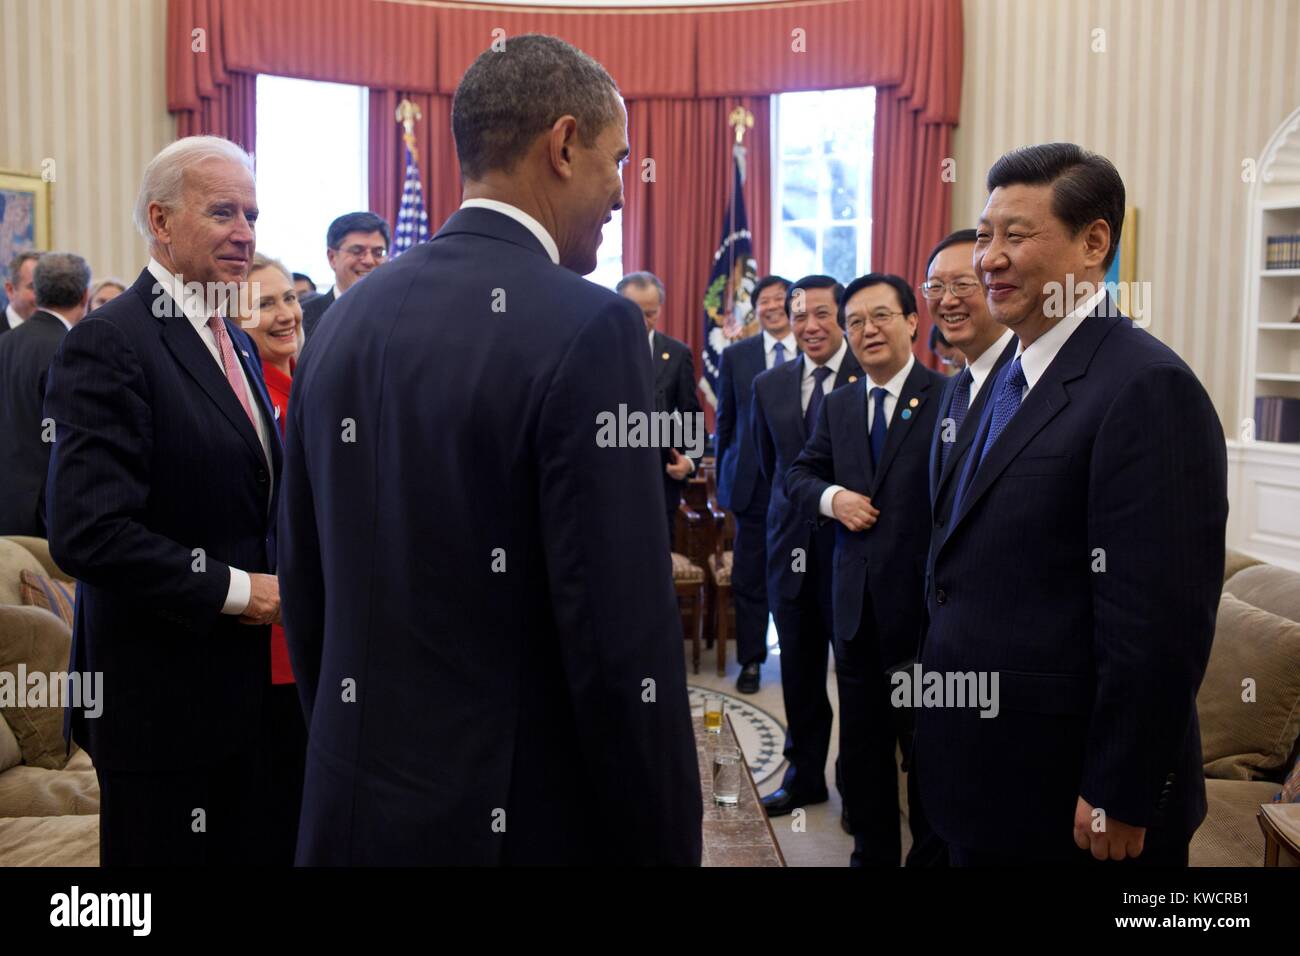 Vice President Xi Jinping headed the Chinese delegation meeting with President Obama. Oval Office, Feb. 14, 2012. In 2013 Xi became General Secretary of the Communist Party and the President of the People's Republic of China. At left is VP Joe Biden. (BSLOC 2015 3 157) Stock Photo